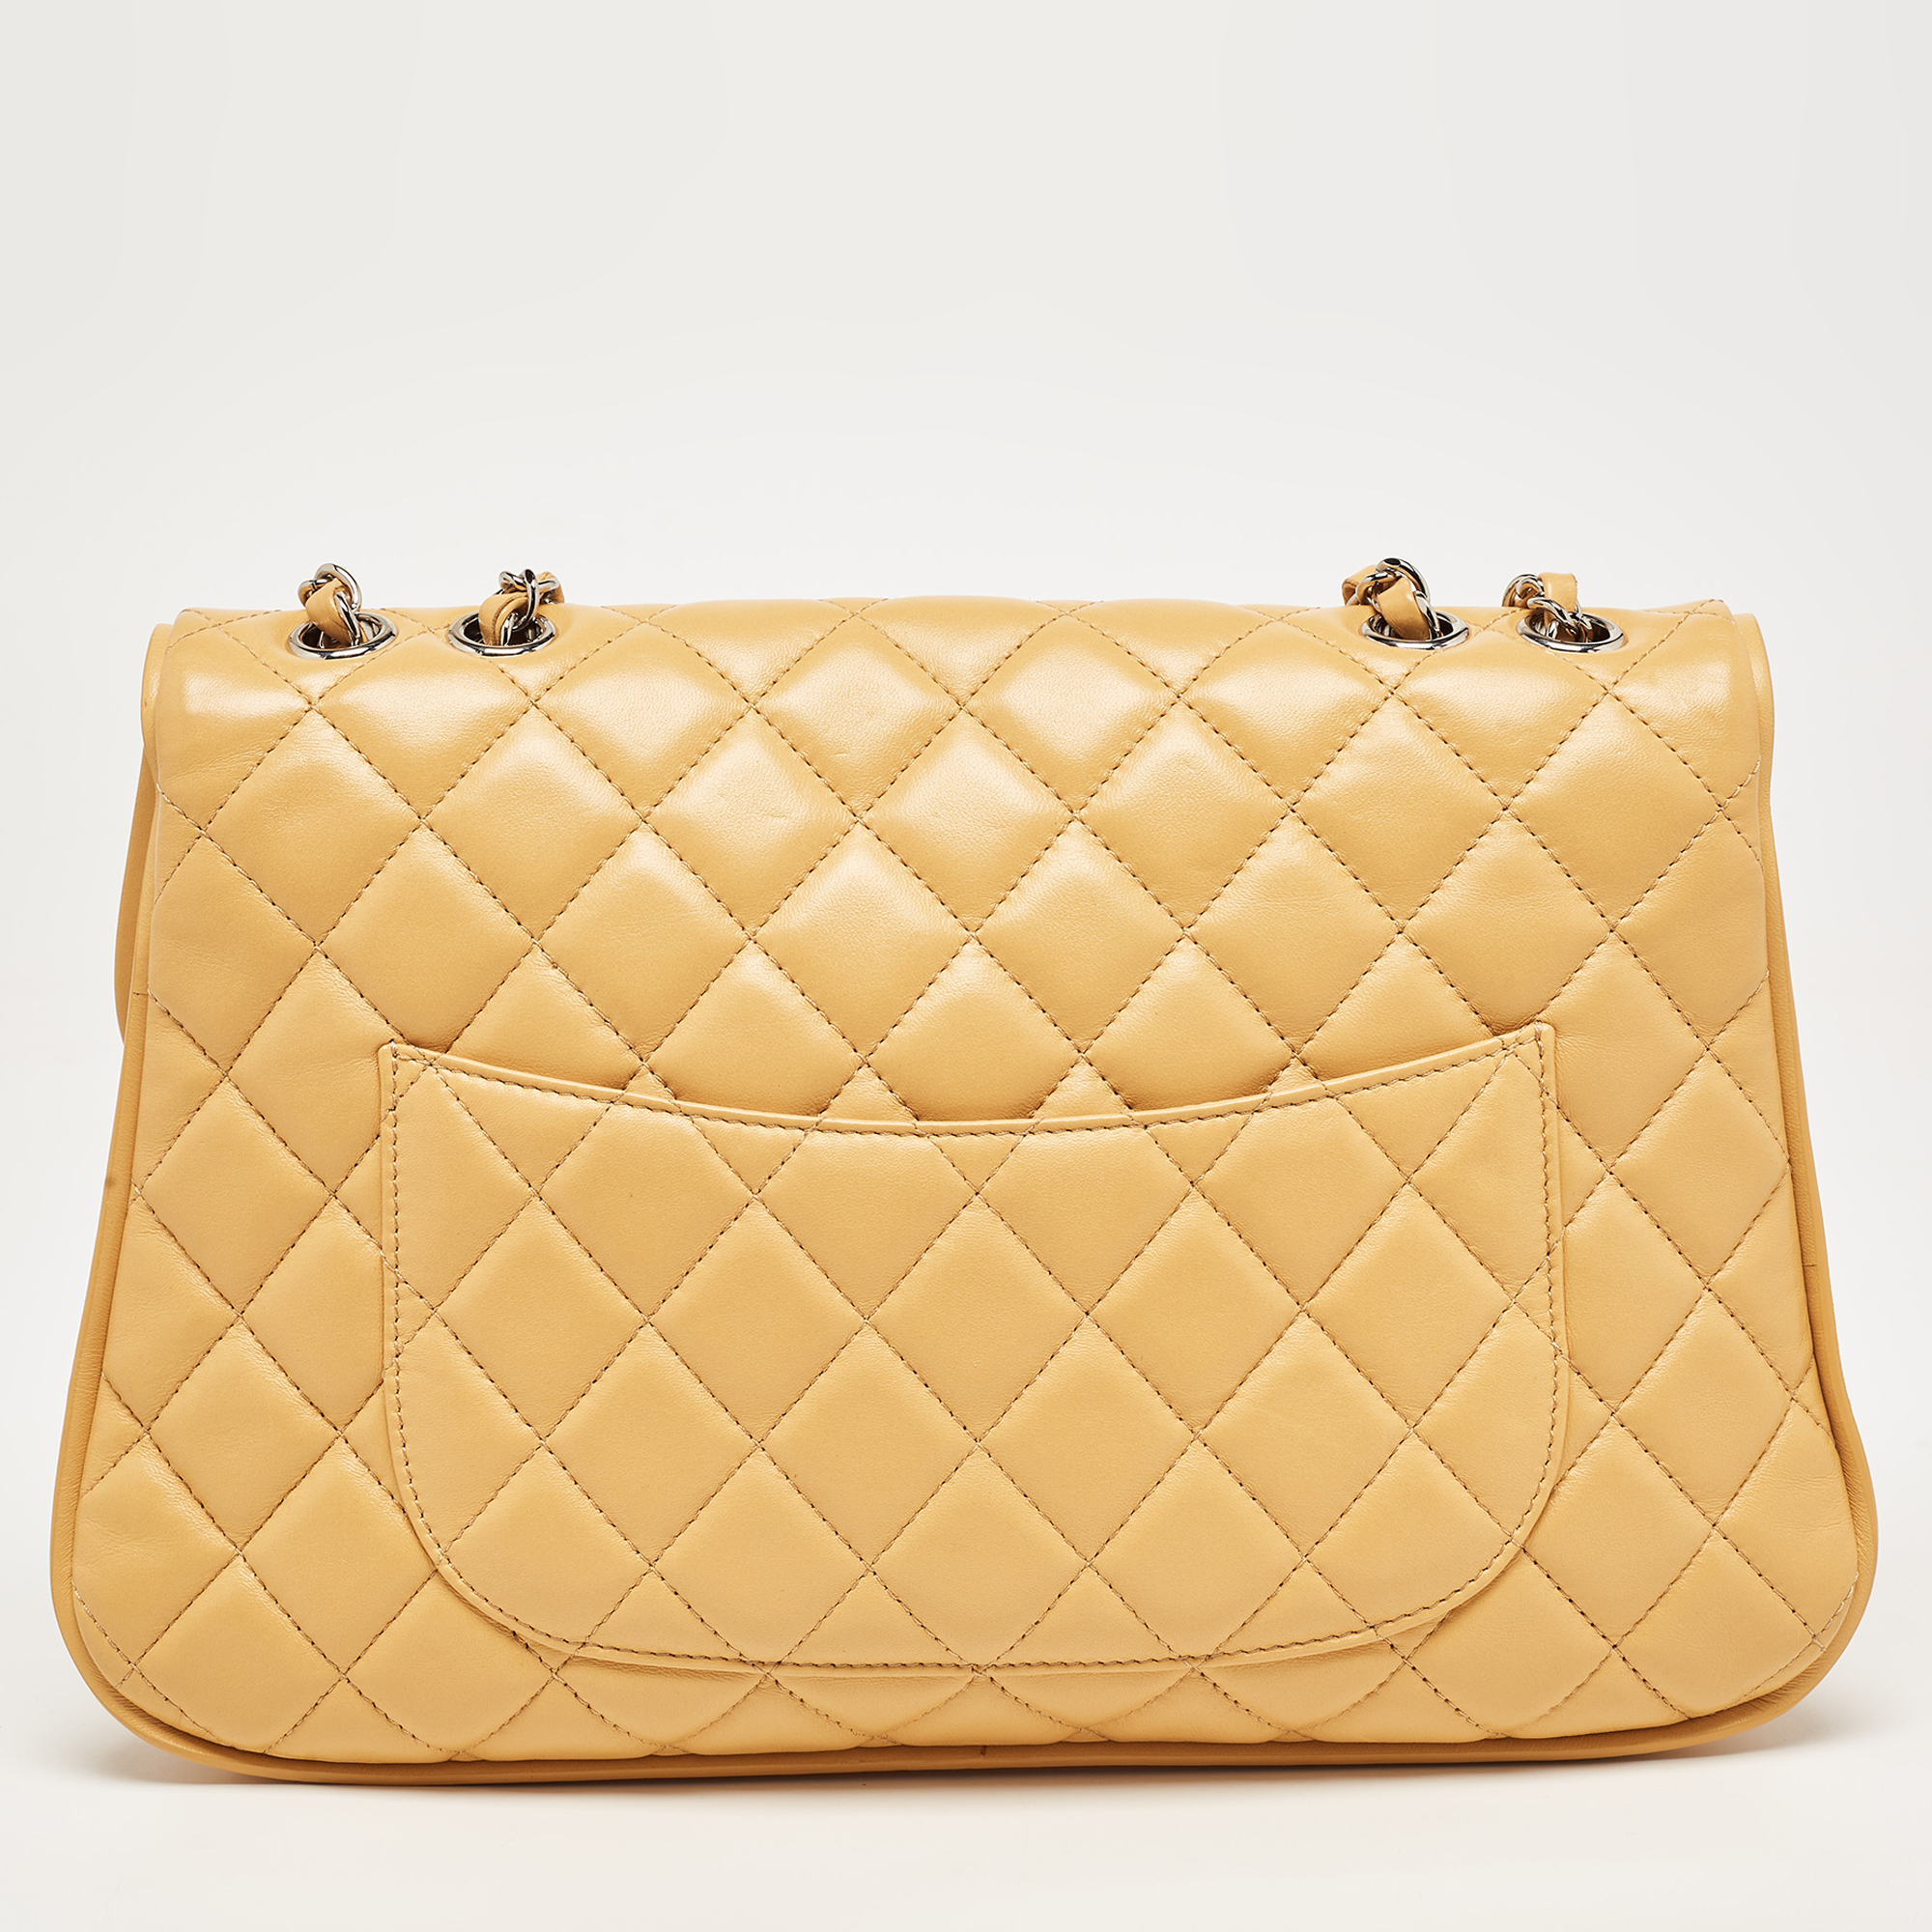 Chanel Yellow Quilted Leather Large Pagode Piping Flap Bag